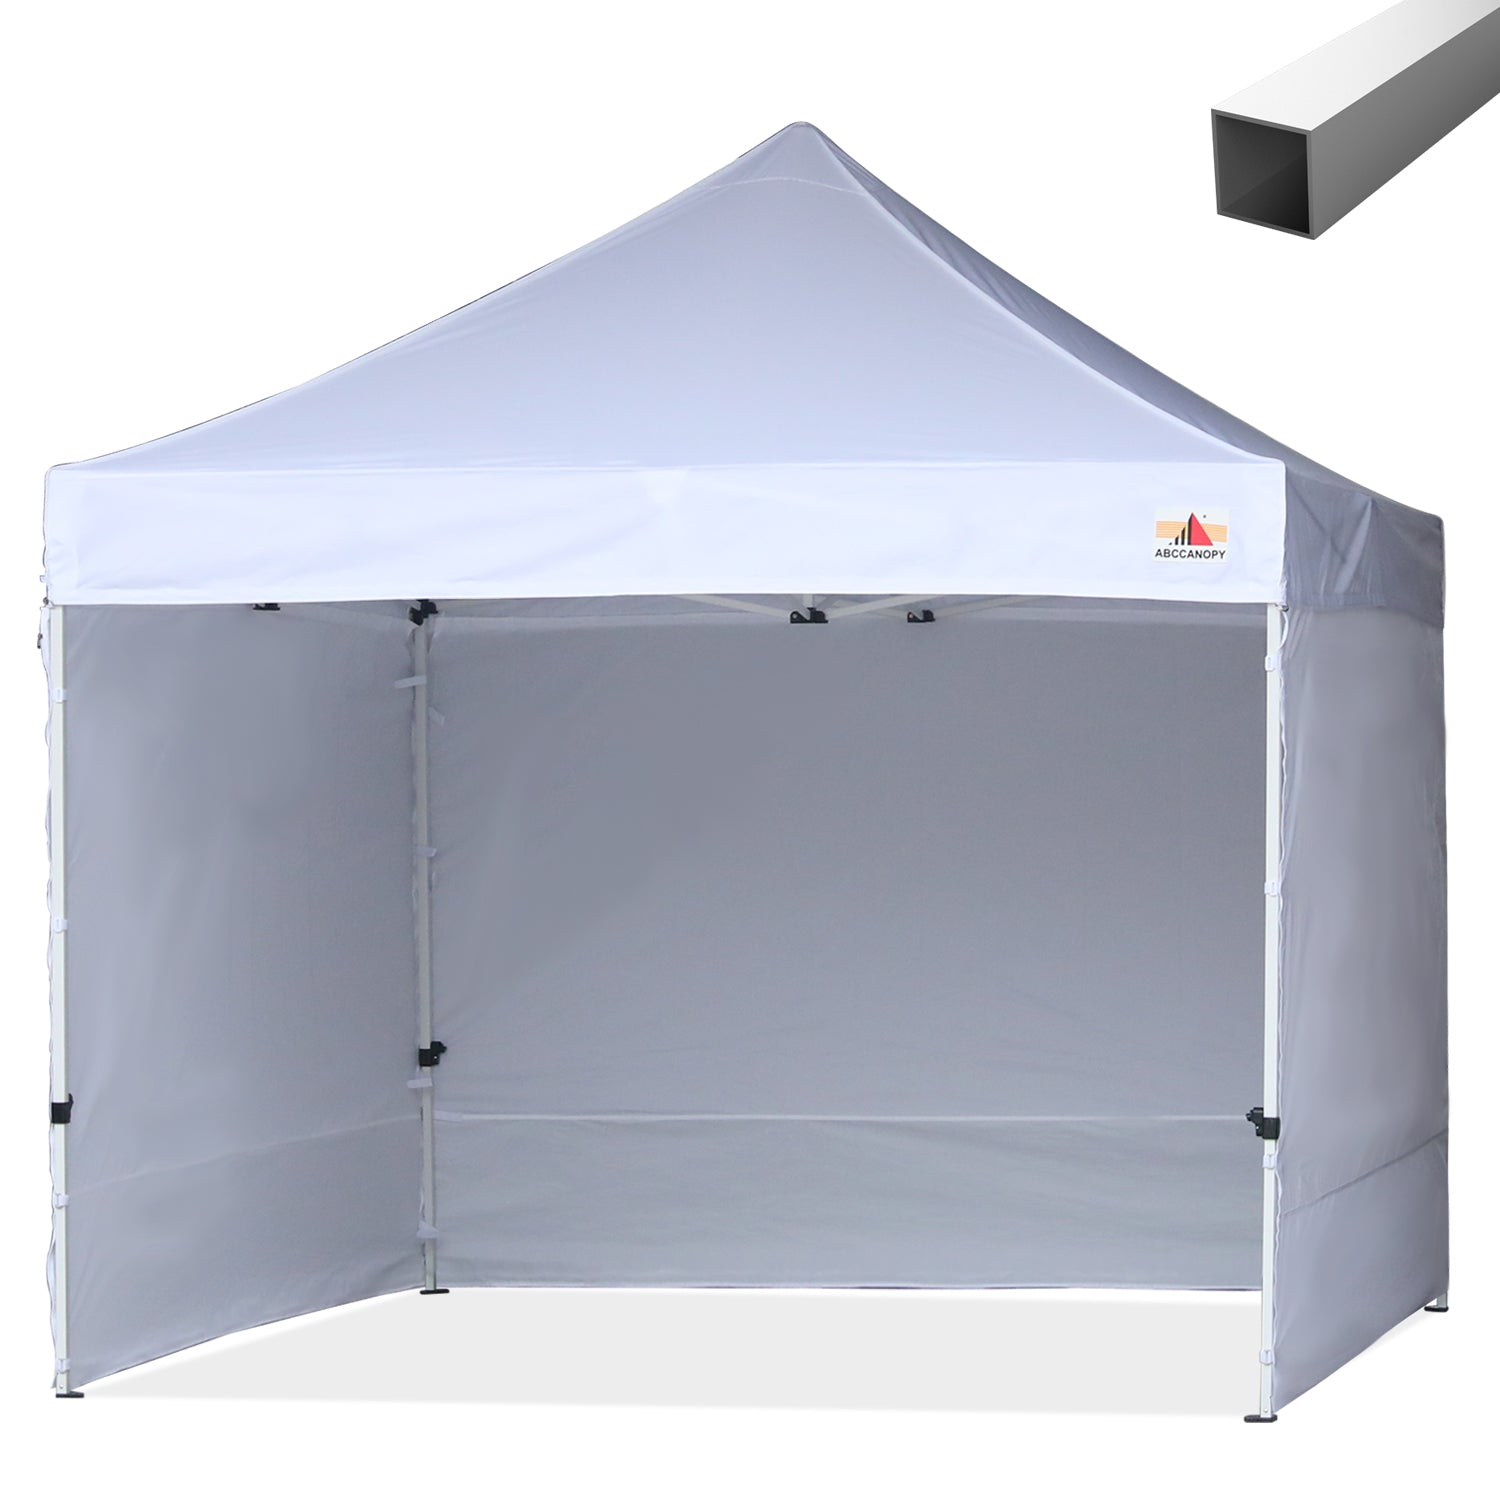 10' x 20' Commercial Frame Canopy Tent for Sale